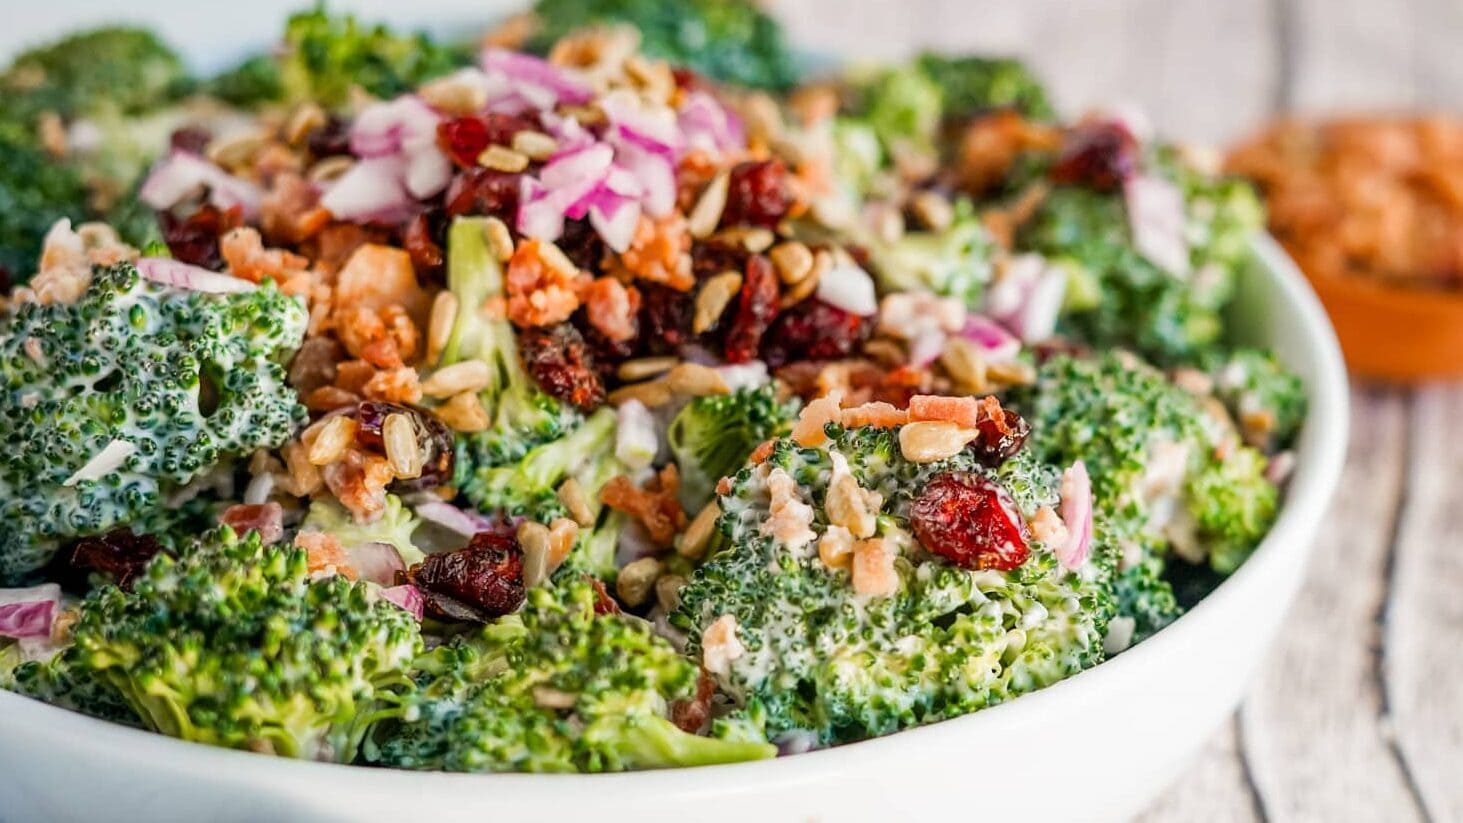 bowl of broccoli salad from the side